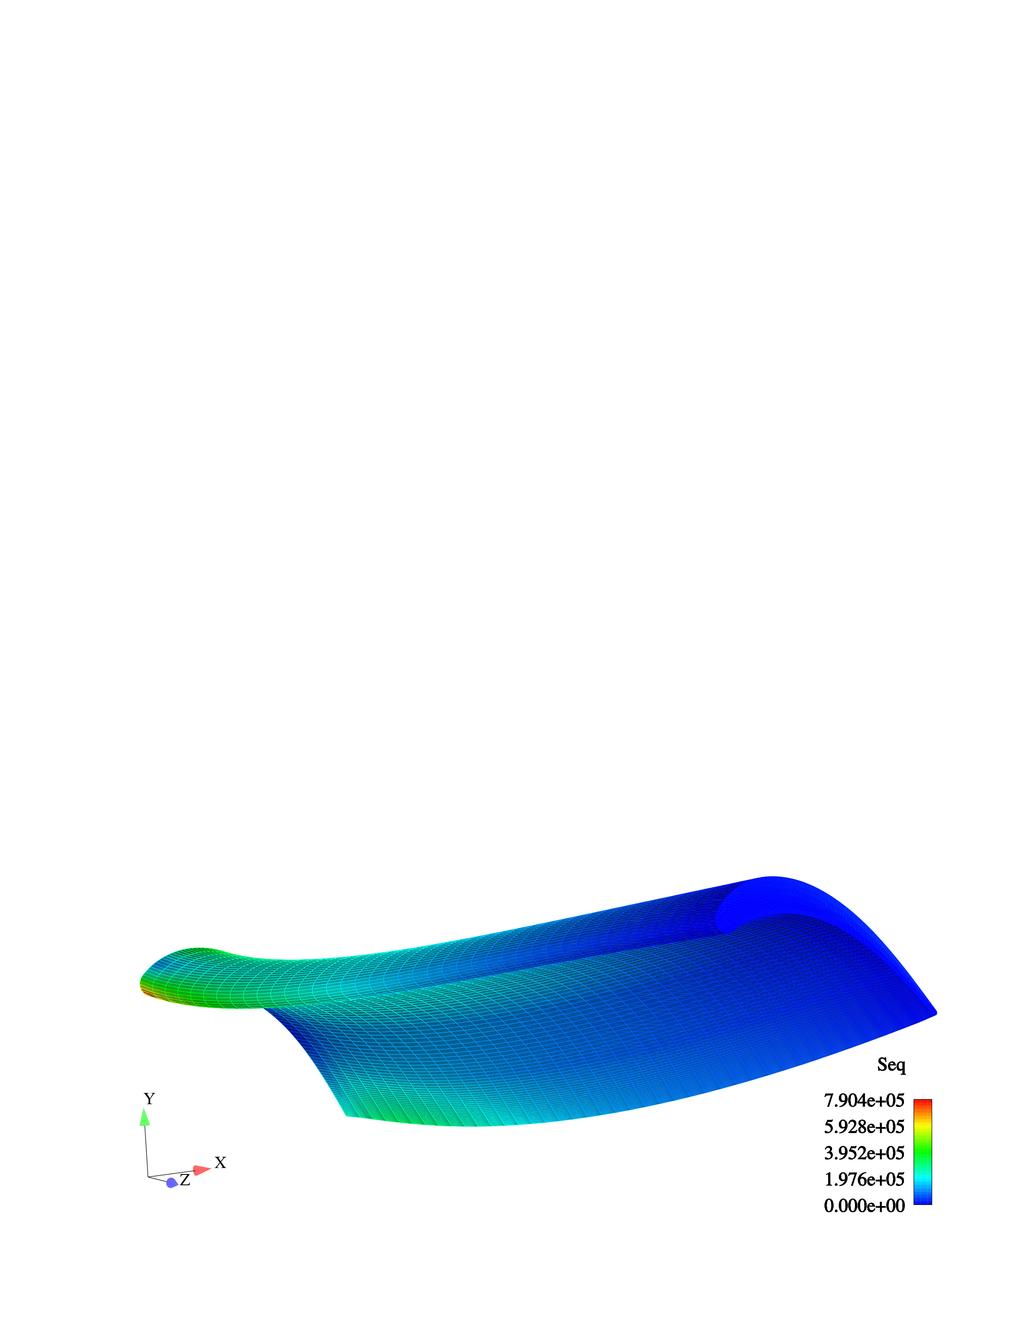 Vibration of a Turbine Blade Mean Equilibrium State FVM for